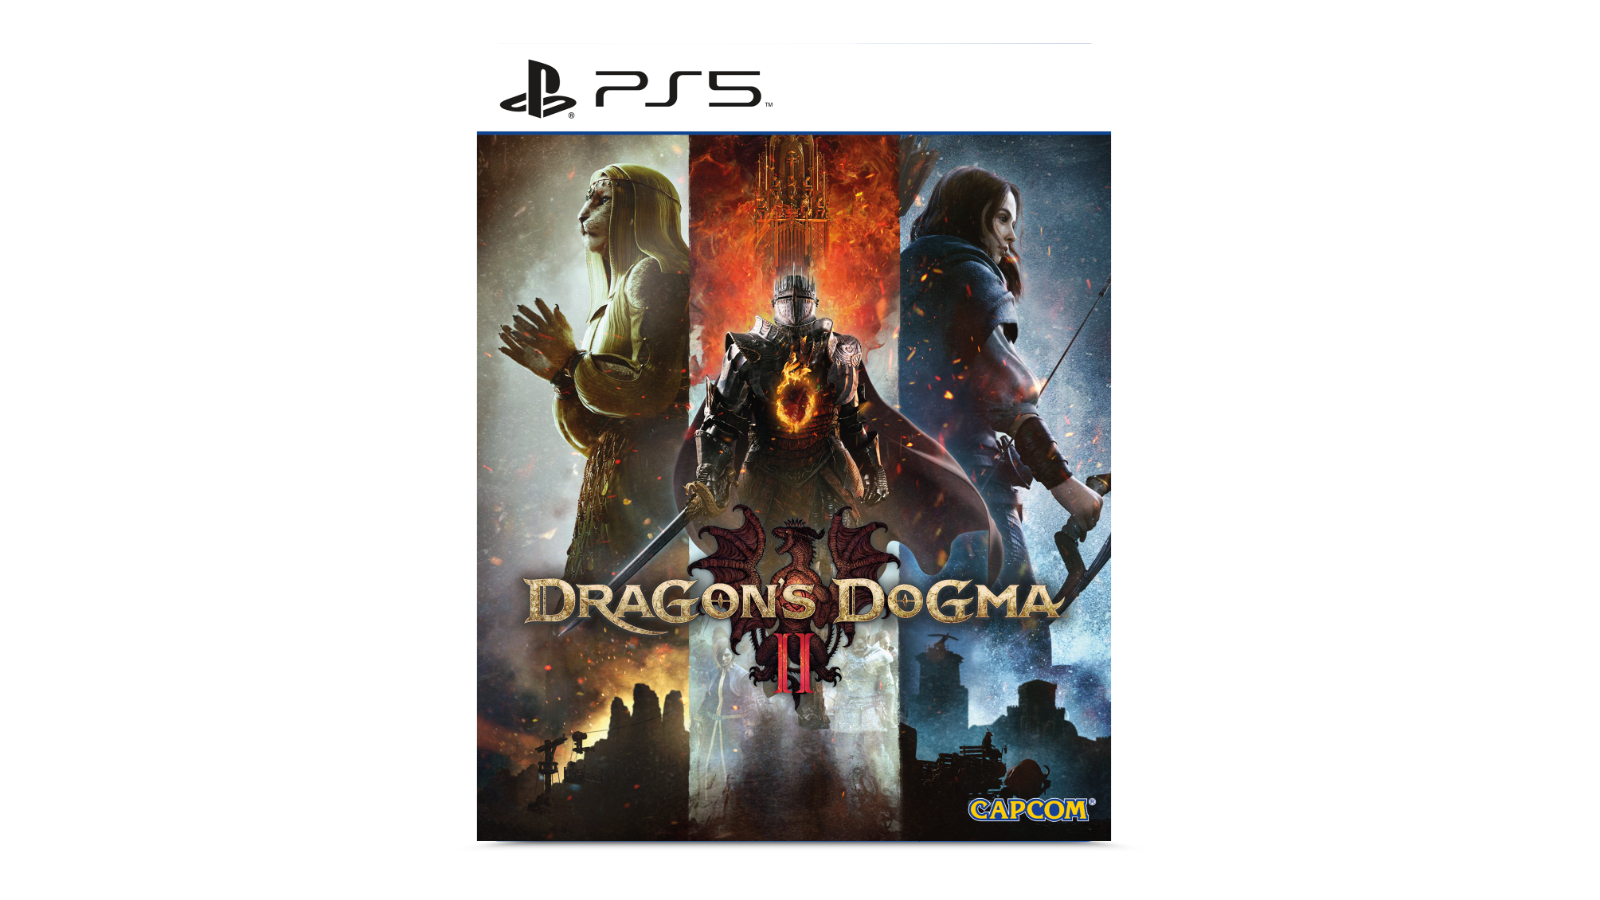 Dragons Dogma 2 Lenticular Edition PS5 (SP)